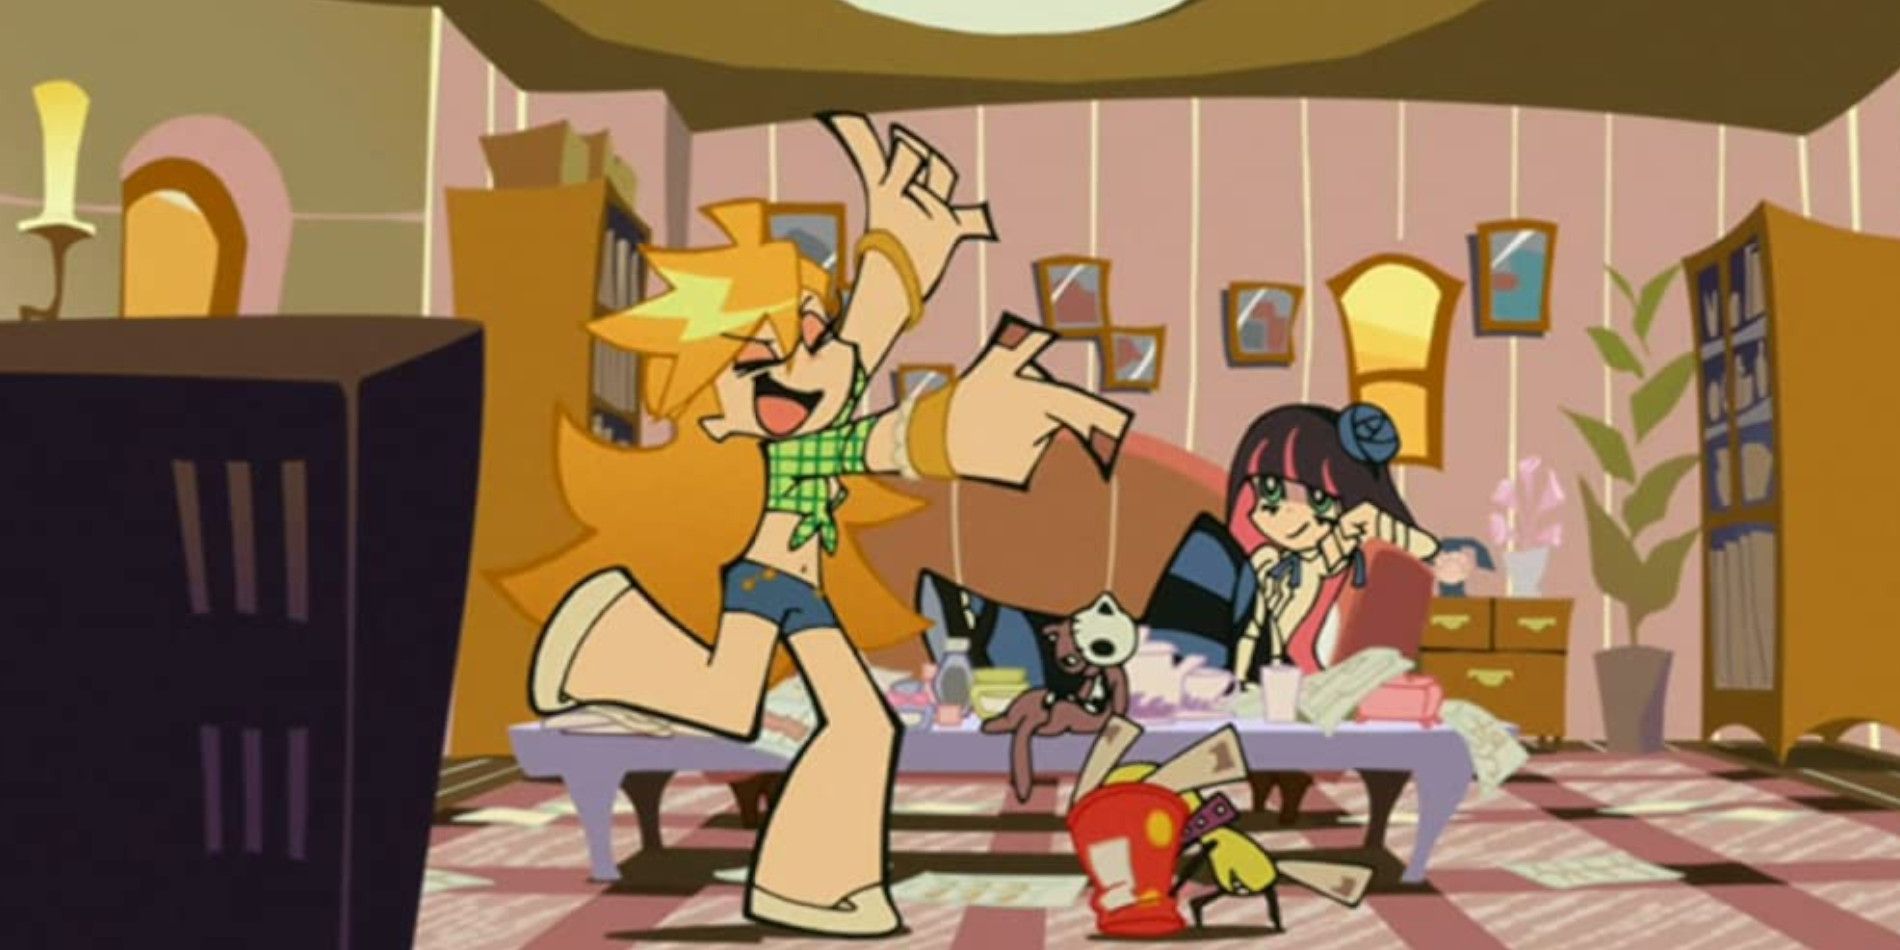 Panty and Stocking play around at home in Panty & Stocking With Garterbelt